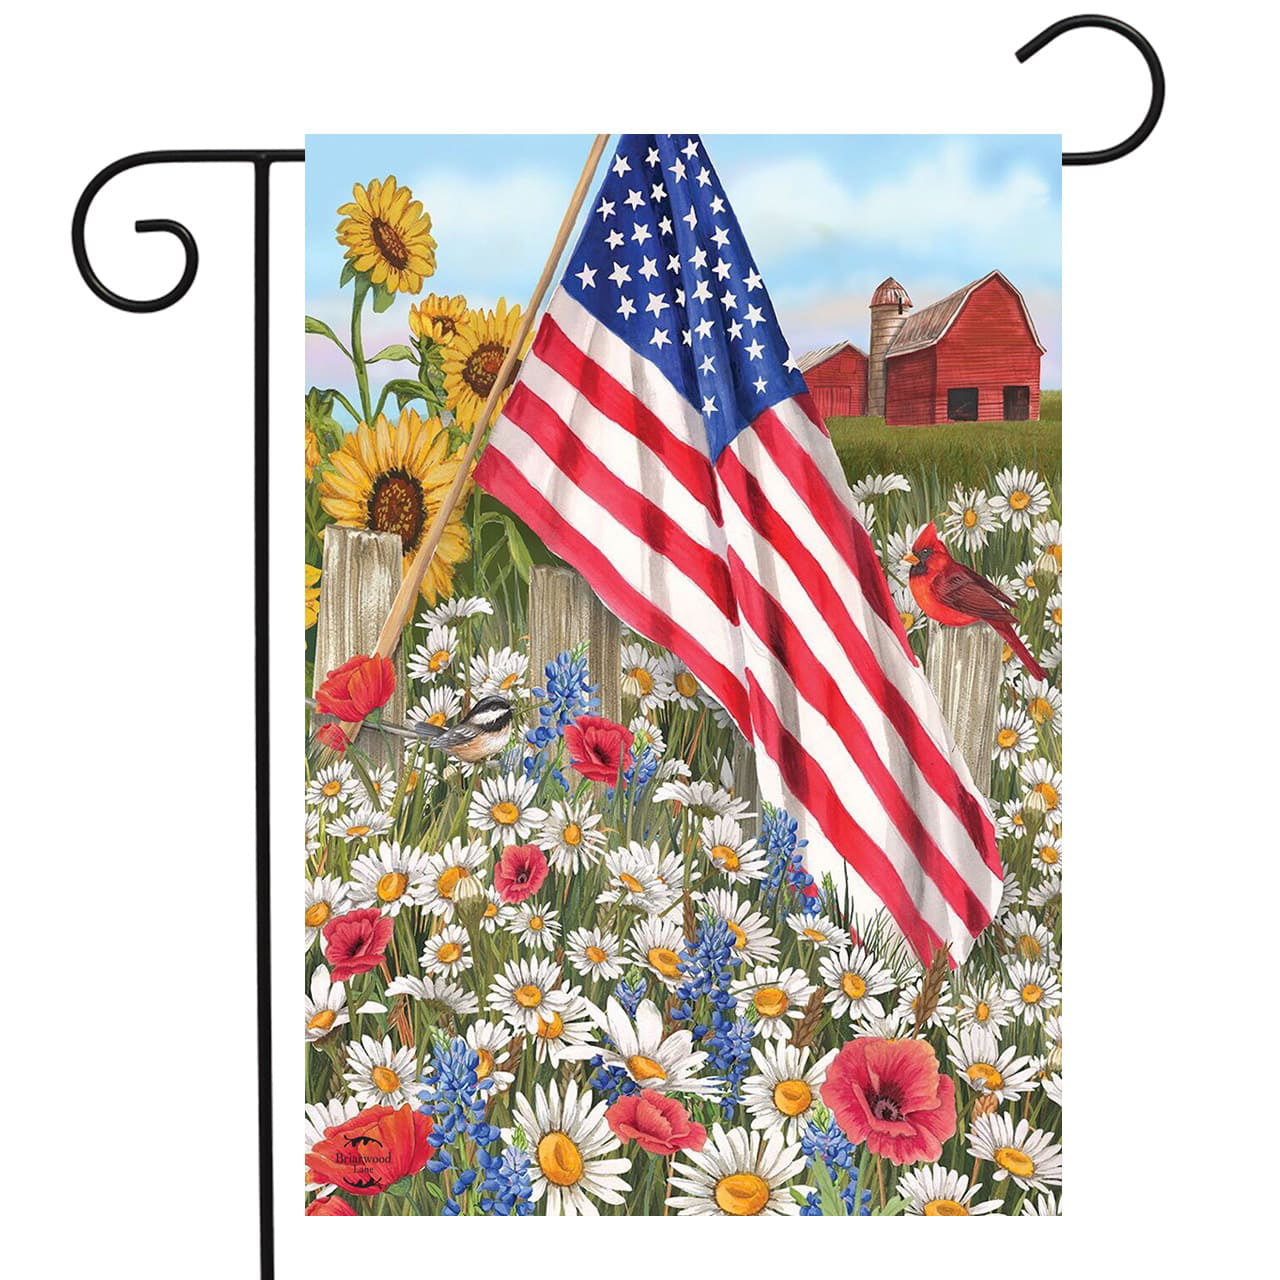 Red White and Blue Patriotic Garden Flag Floral 12.5" x 18" Briarwood Lane 